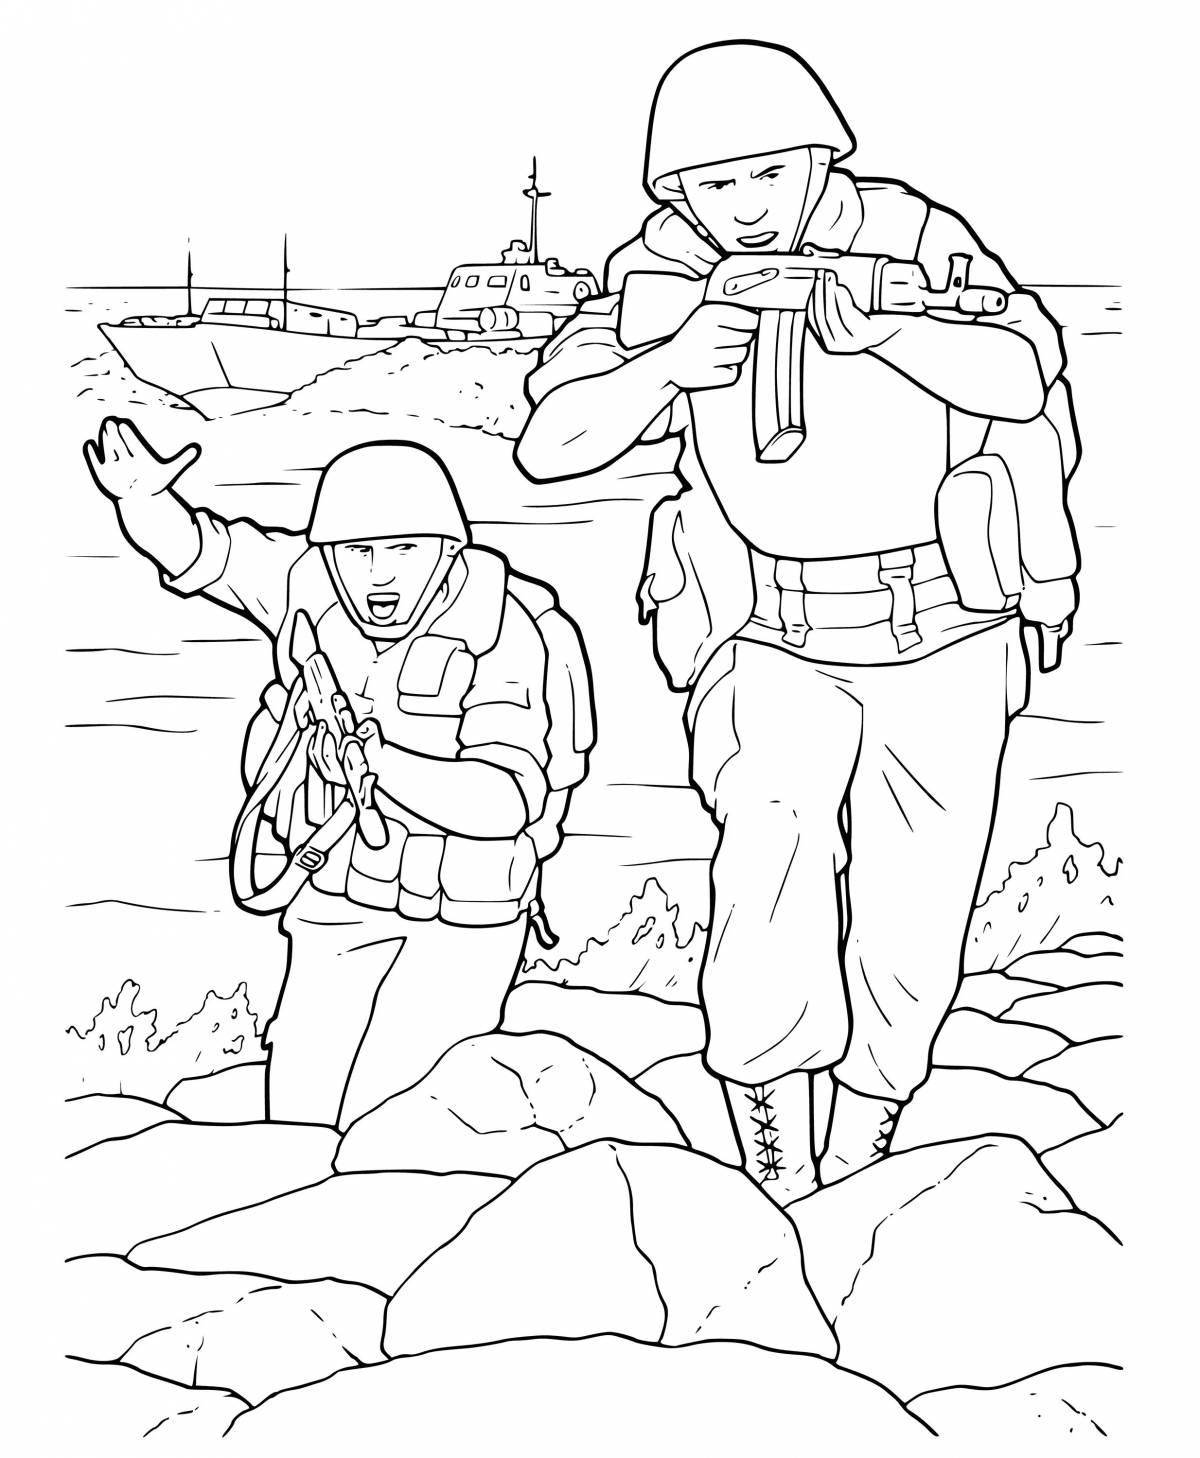 Live coloring of the military profession for the little ones